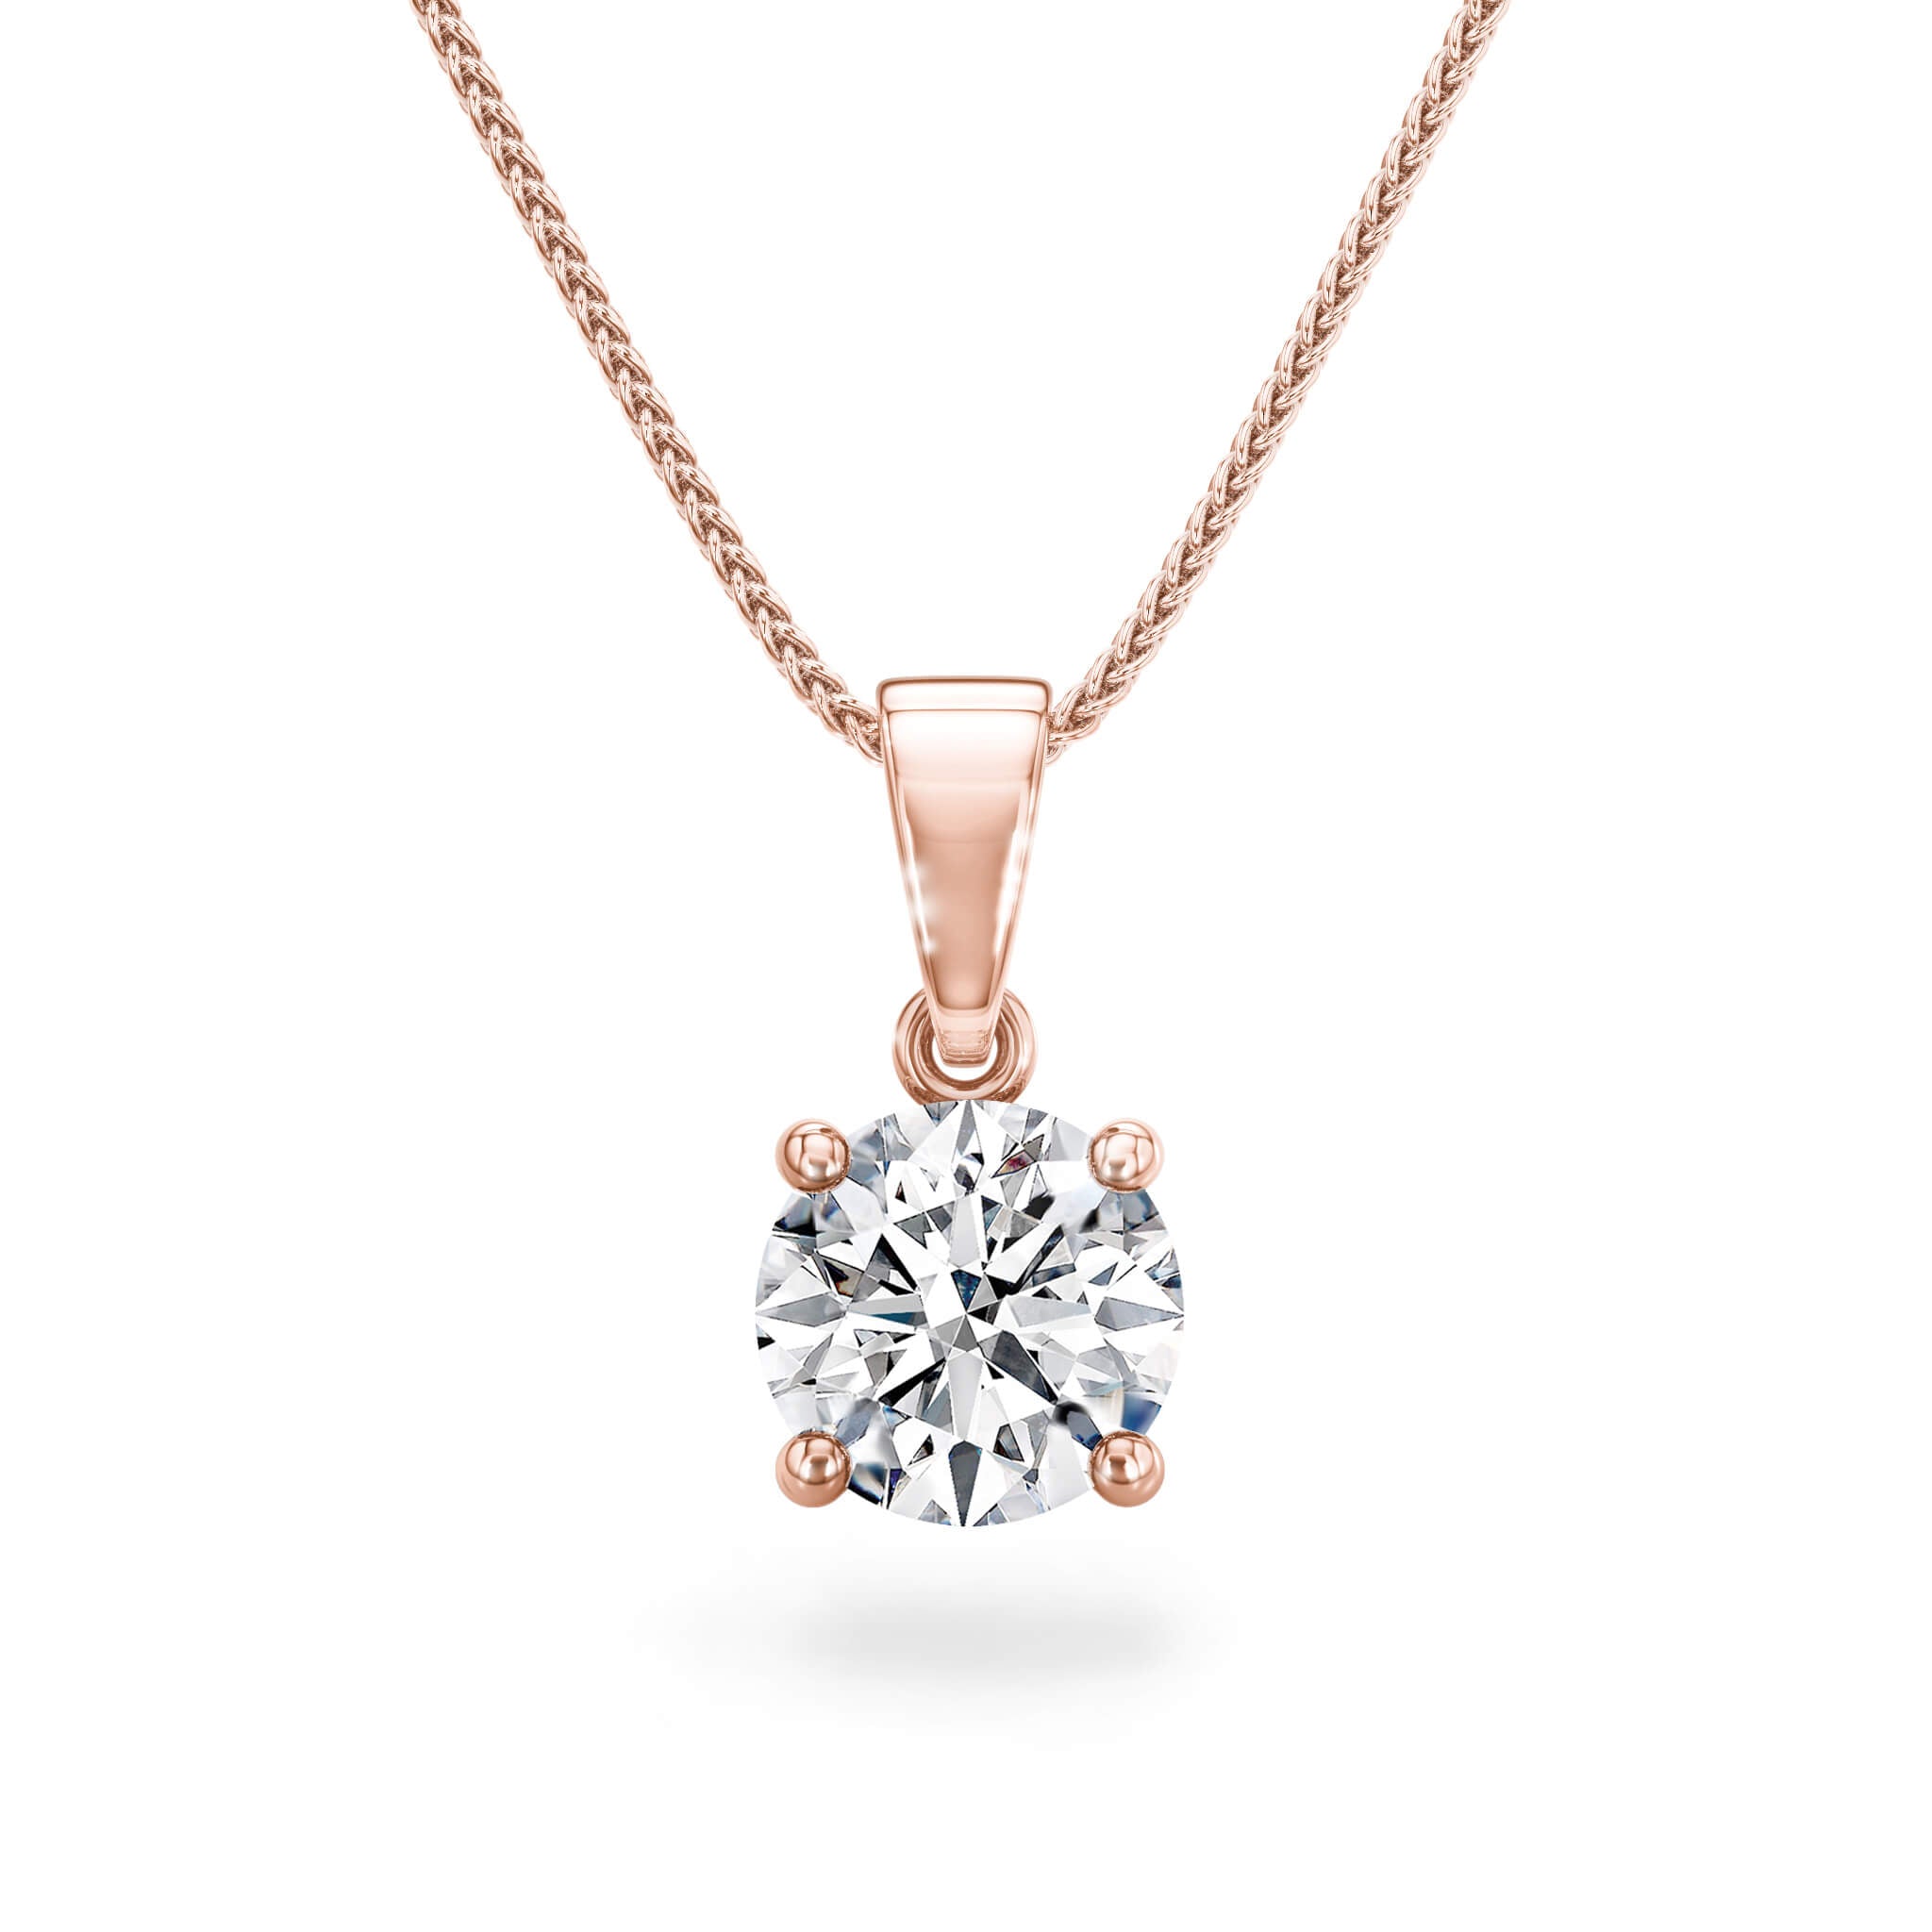 Shimansky - 4 Claw Solitaire Diamond Pendant 1.00ct crafted in 18K Rose Gold